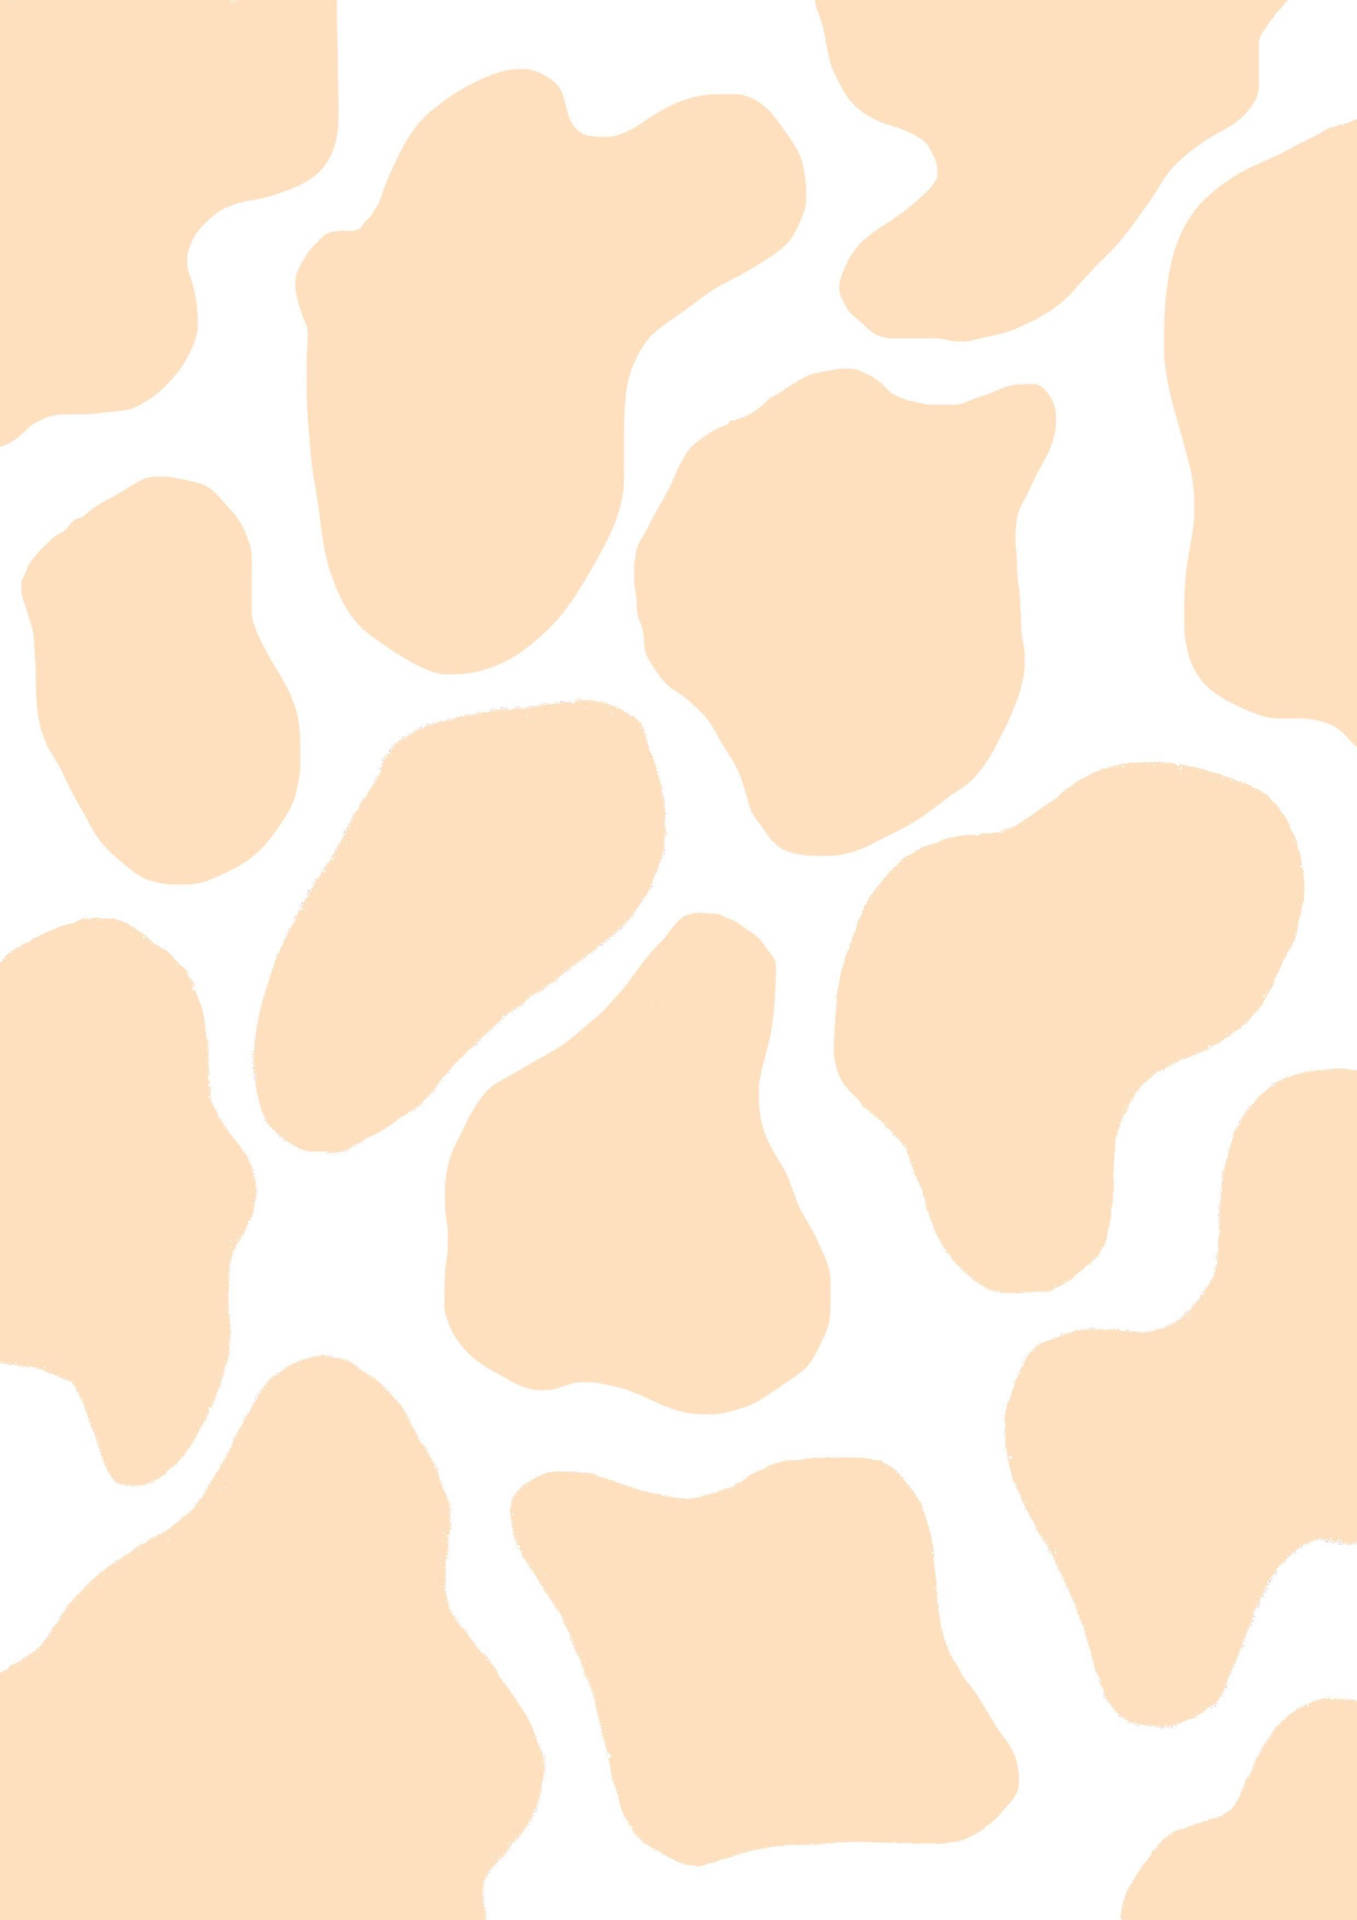 Embrace Eccentricity With Vibrant Pastel Orange Aesthetic Cow Print. Background